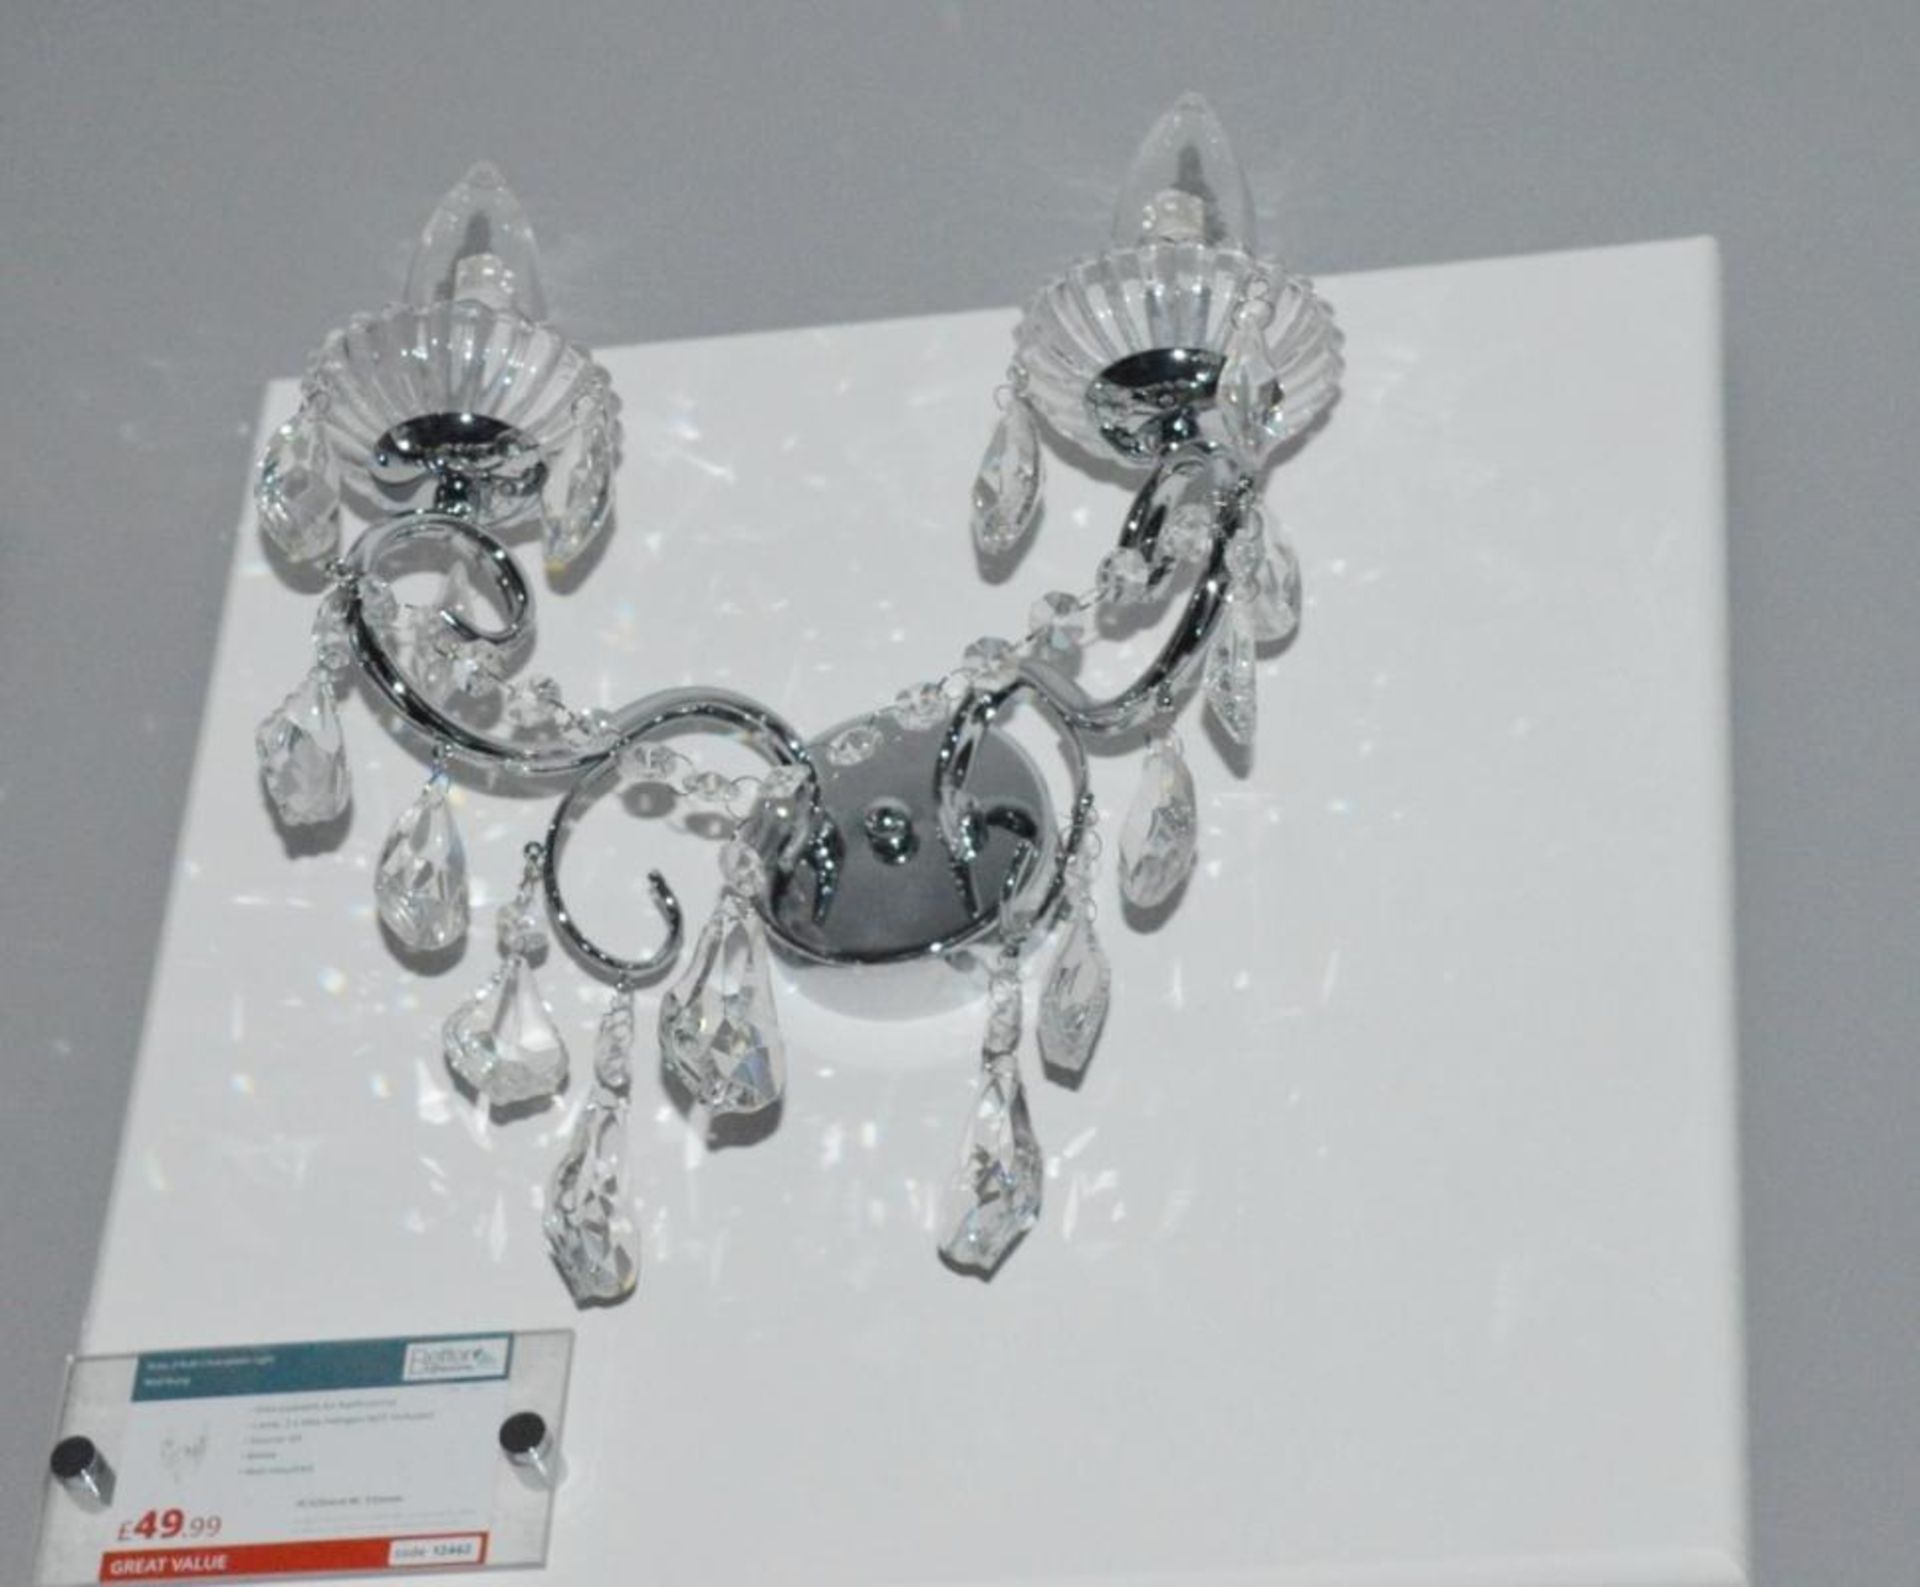 Layla Crystal Chiesal Wall Chandelier - Ex Display Stock - CL298 - Ref: J1159 - Location: Altrincham - Image 3 of 8